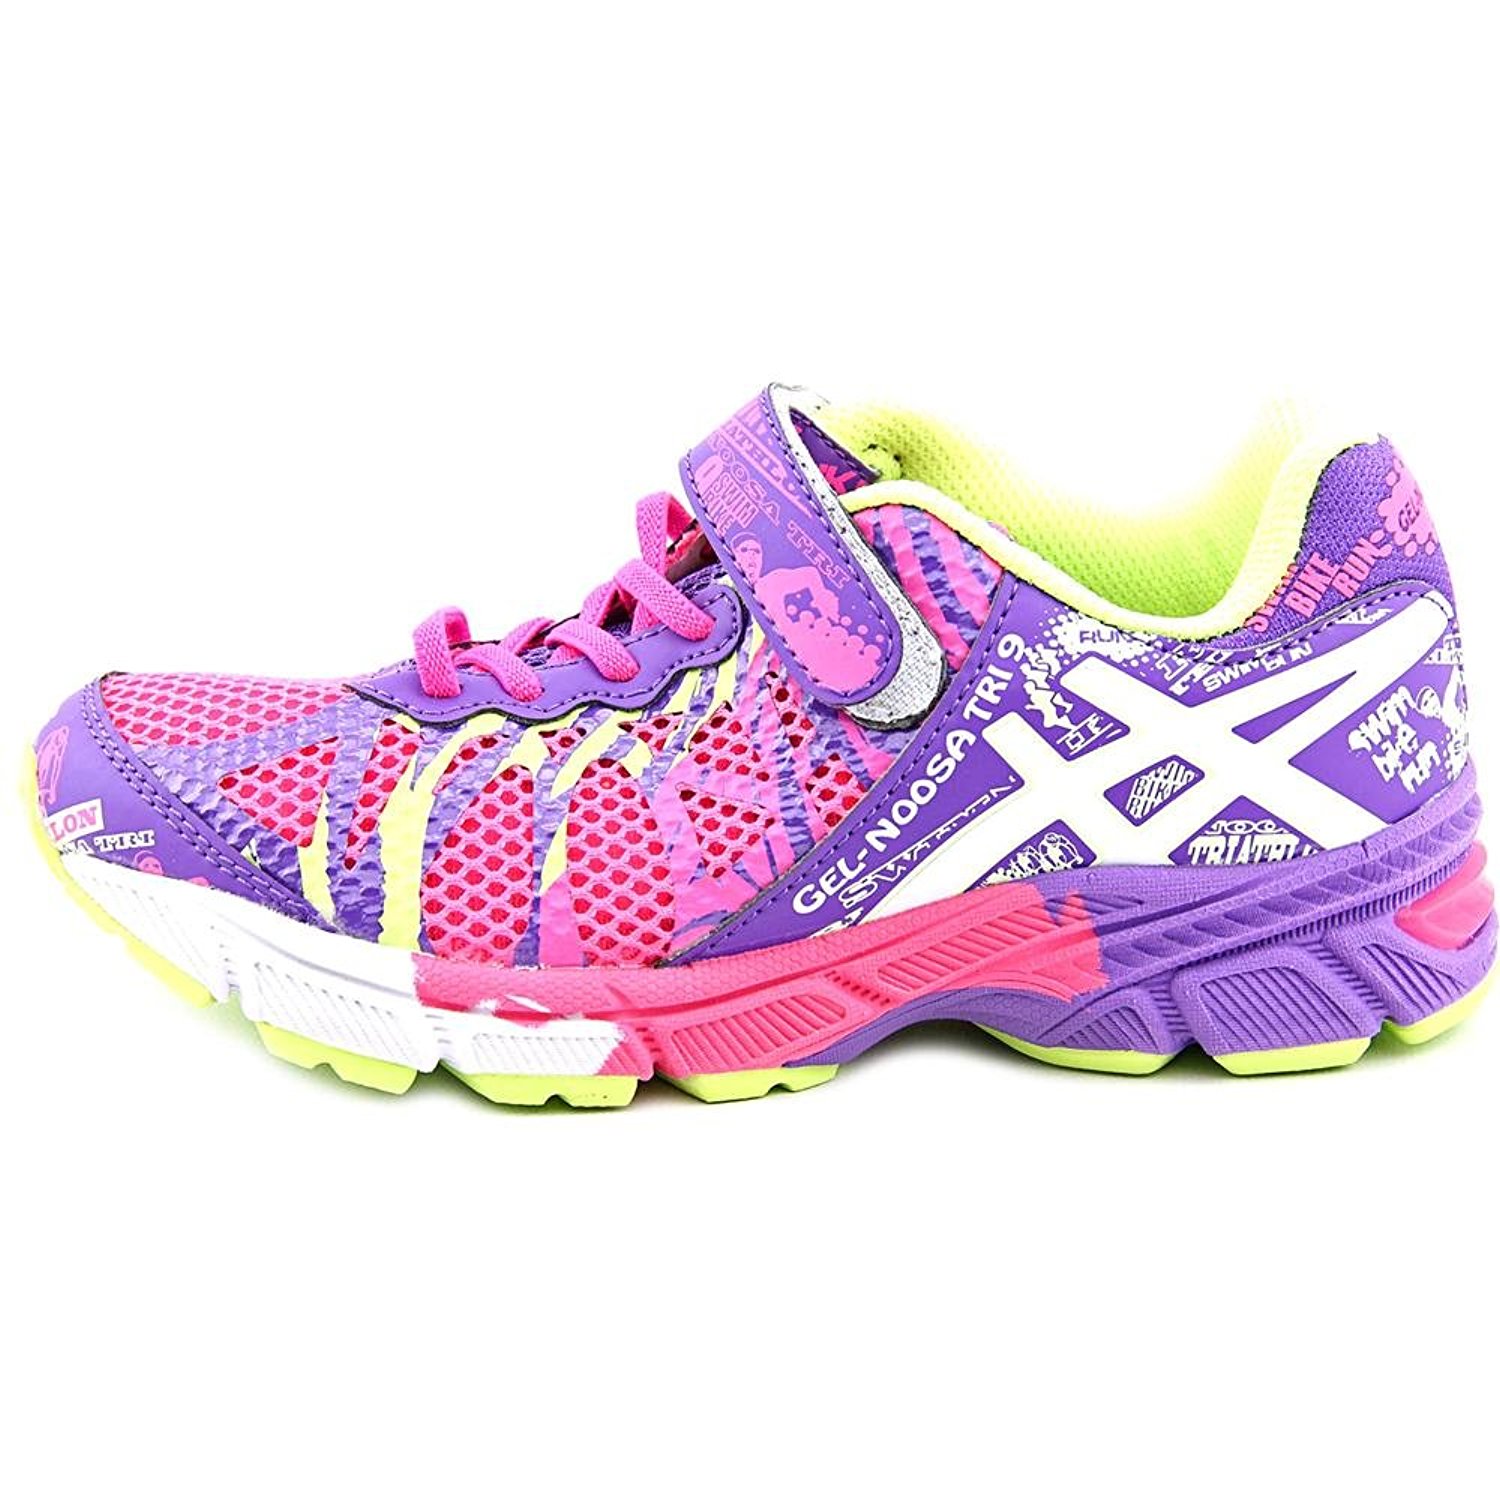 asics gel noosa tri 9 youth, Amazon.com | Asics Gel-Noosa Tri 9 PS Youth Round Toe Synthetic Pink Sneakers (2 M US Little Kid, PINK/WHITE/ZEBRA) | Running